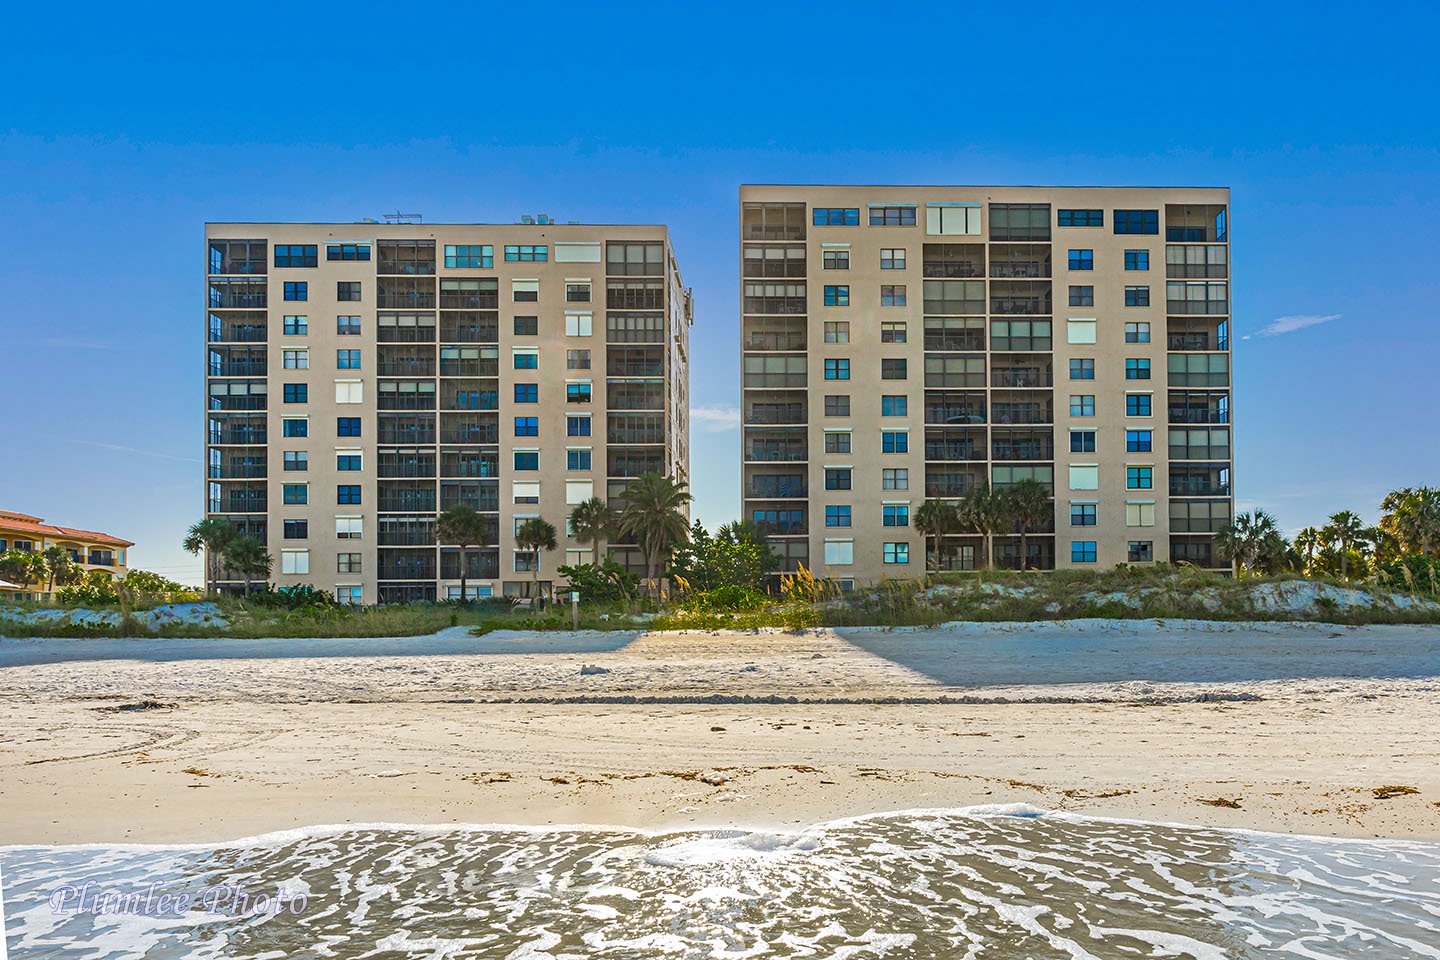 Beach side view of Reflections buildings